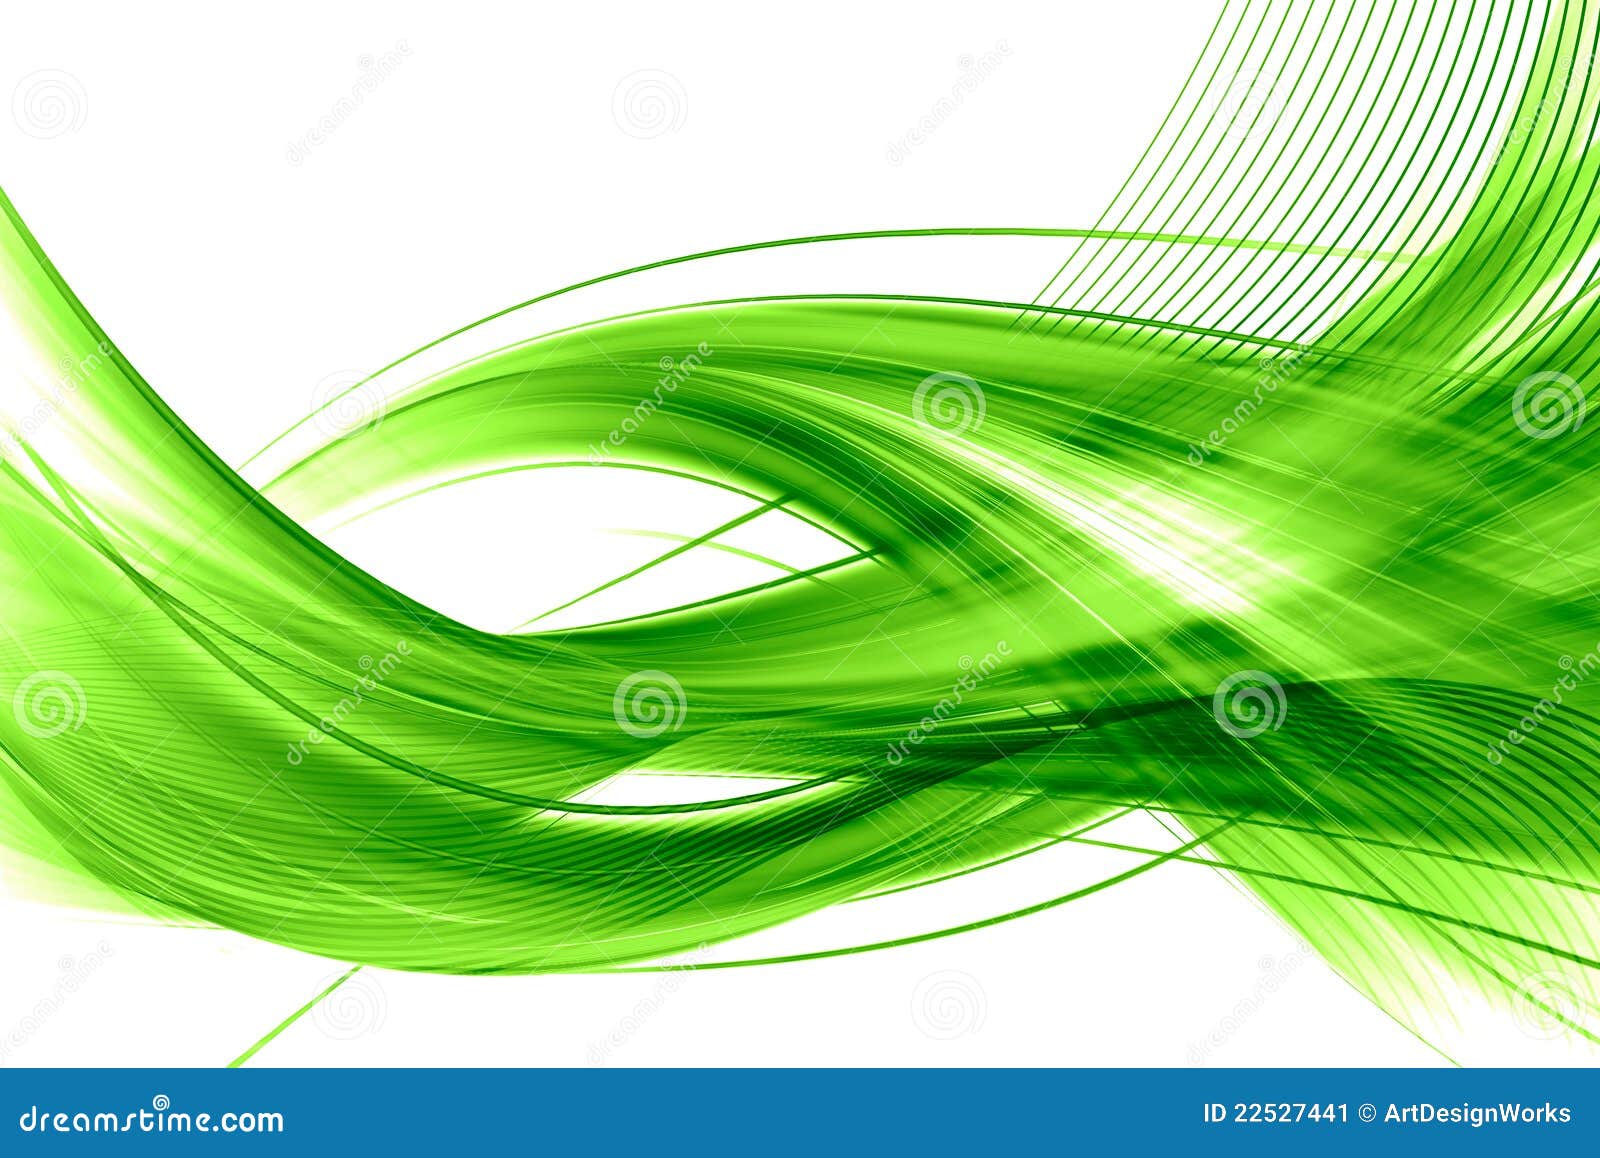 green abstract corporate background 